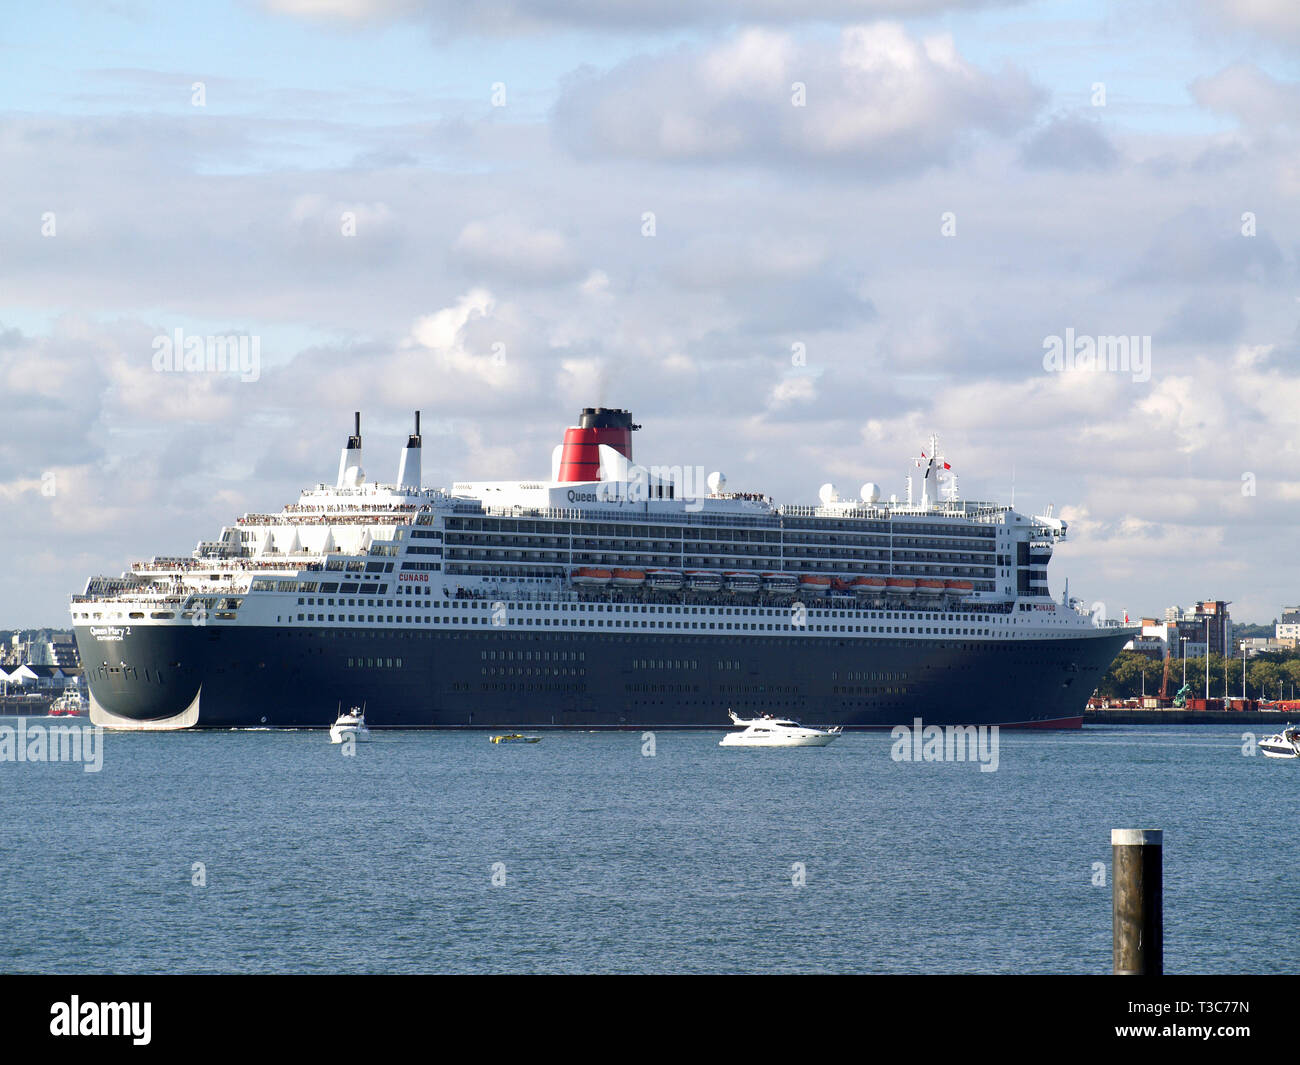 RMS Queen Mary 2 at Southampton Docks, photograph taken from Hythe Marina, Hampshire, England, UK Stock Photo